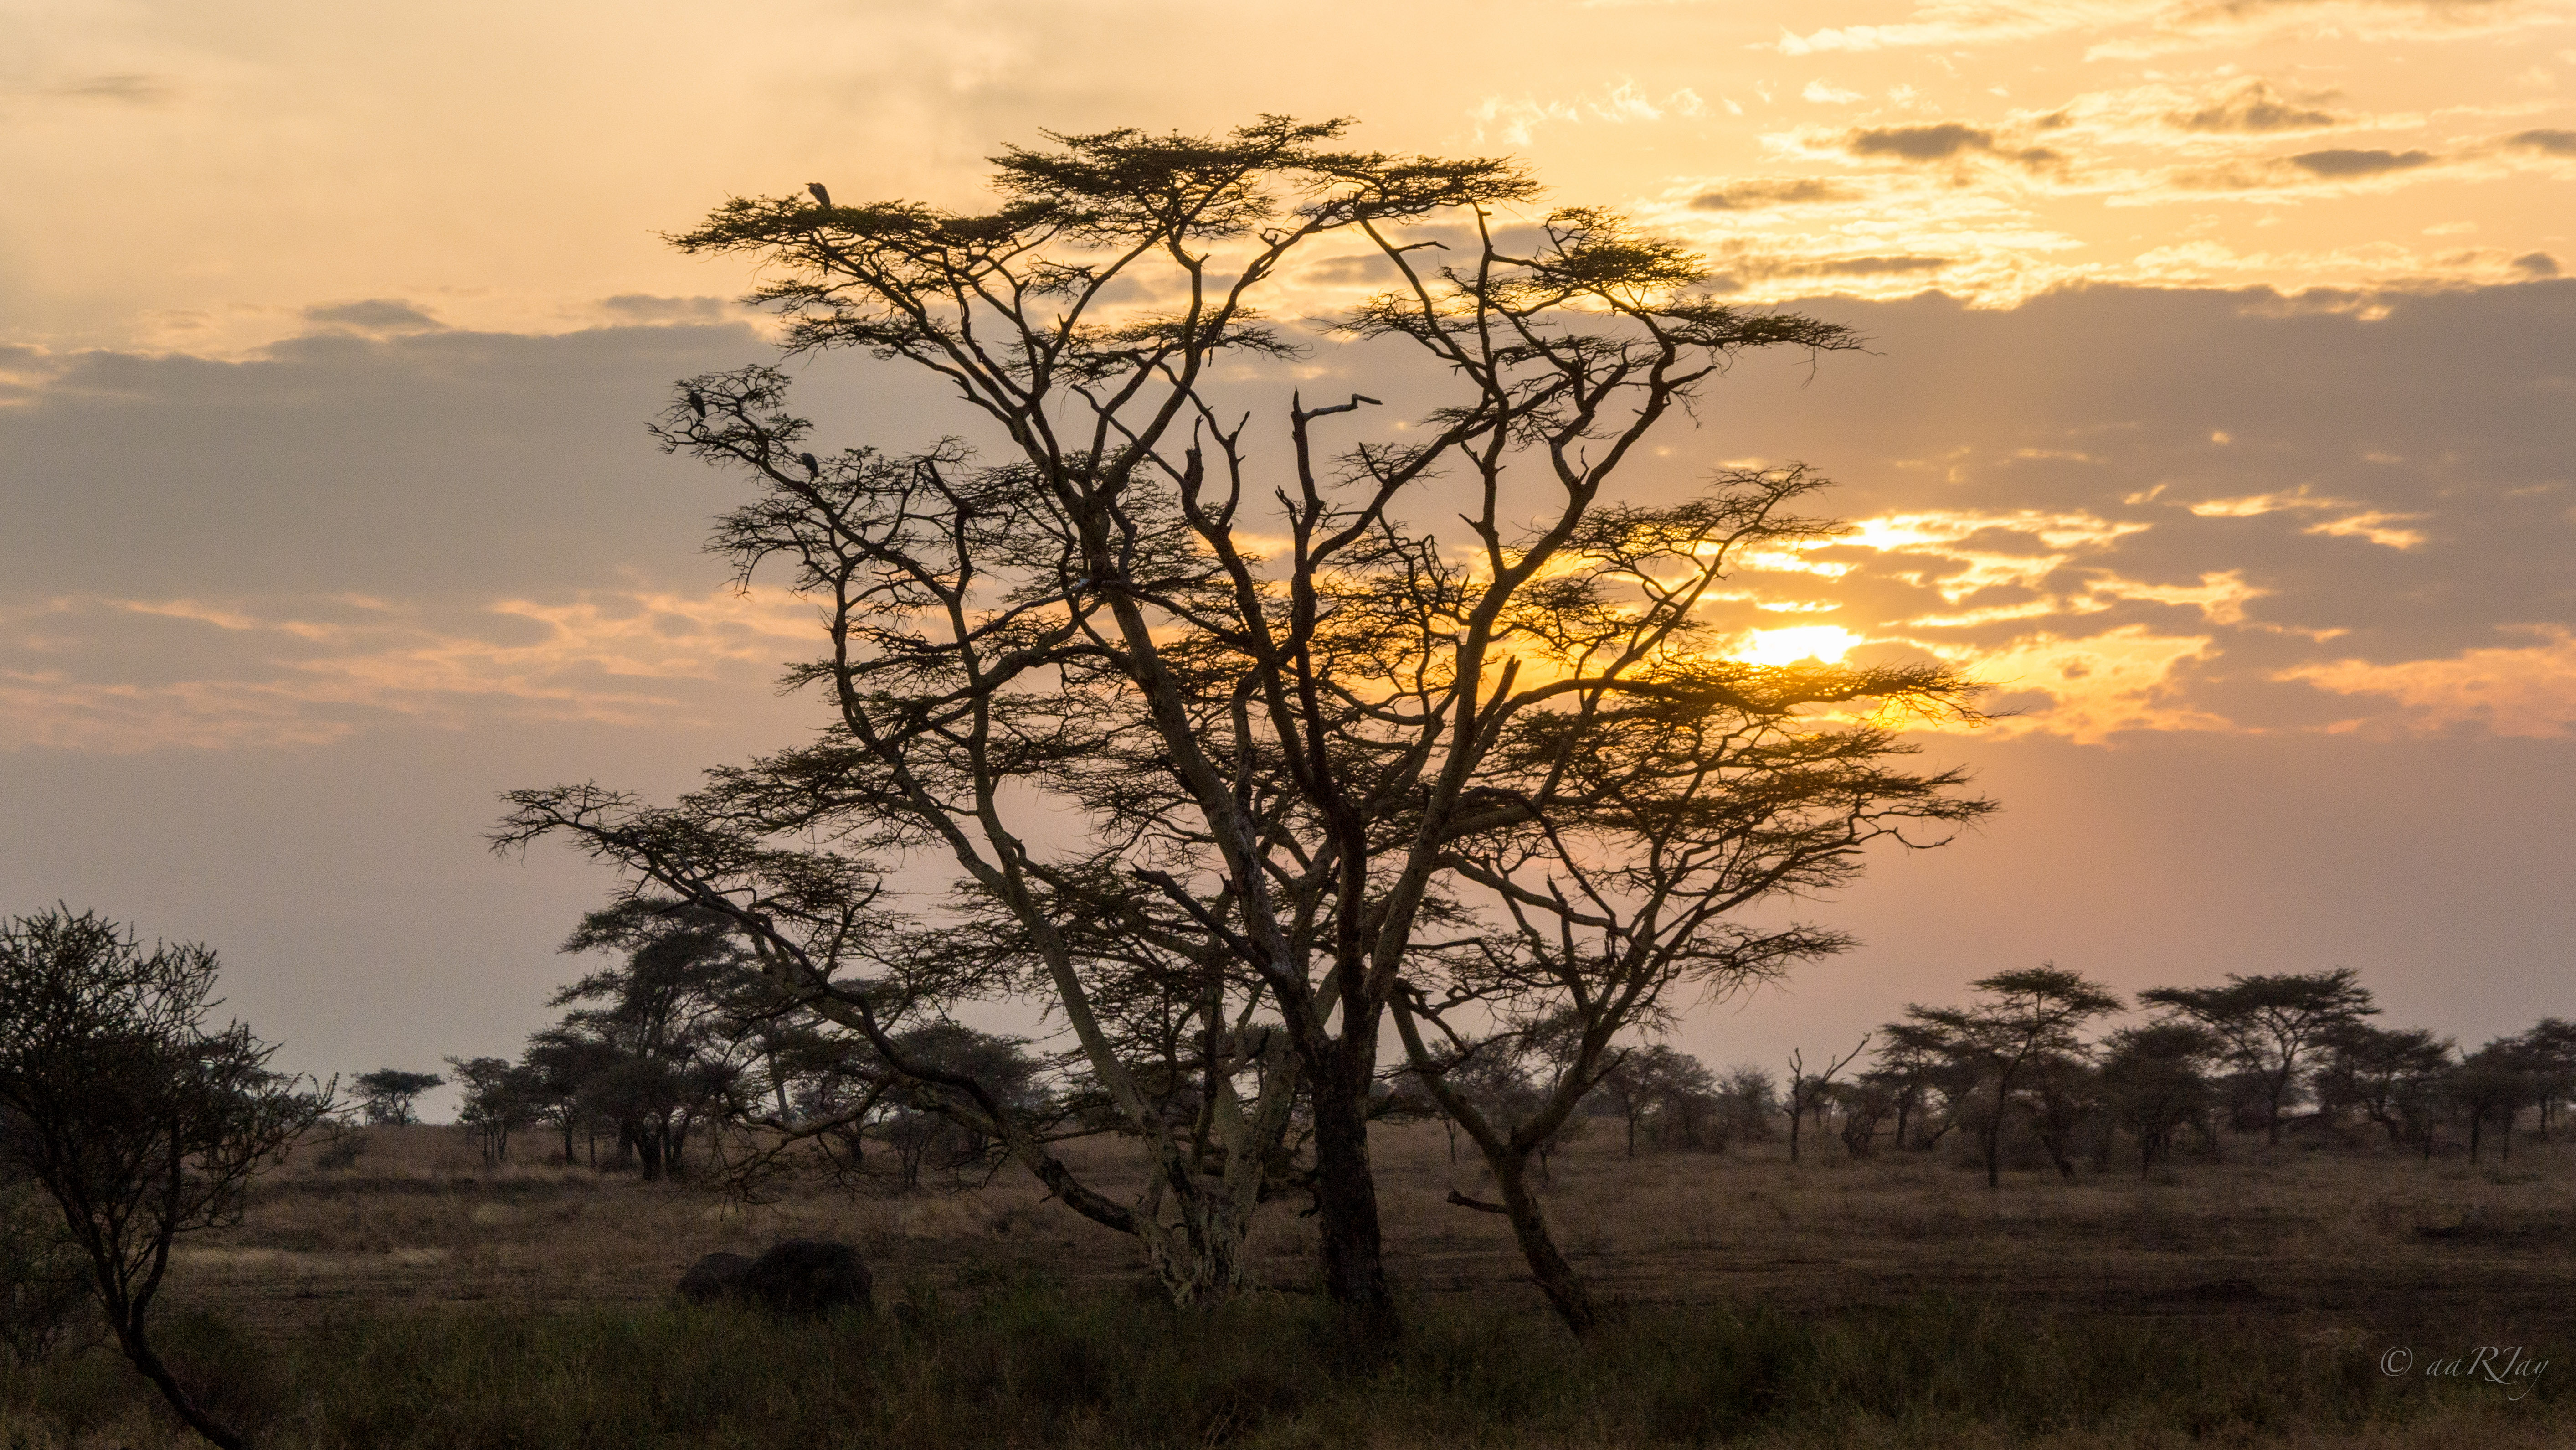 Typical African Golden Sunset With Acacia Tree In 